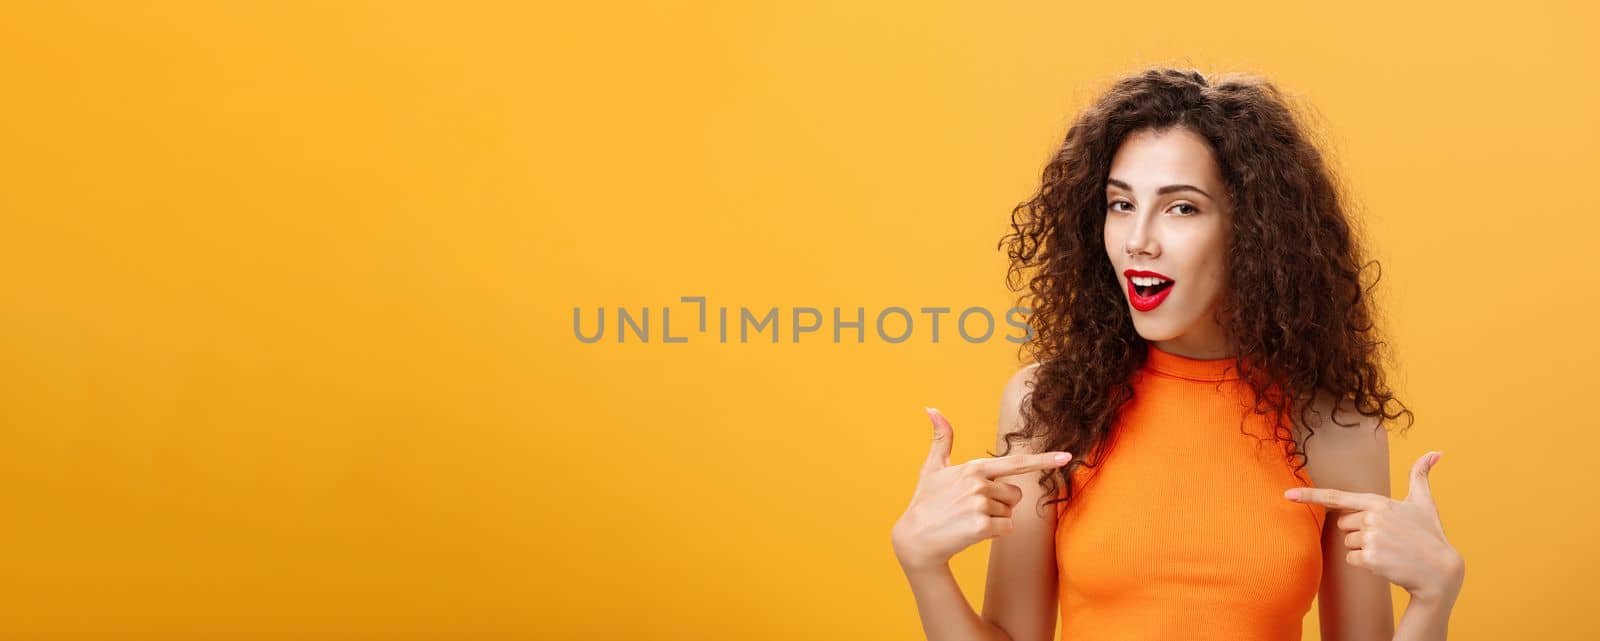 Proud and satisfied cool urban female with red lipstick. and curly hairstyle pointing at herself with self-assured expression winking bragging about skills and achievements over orange background.